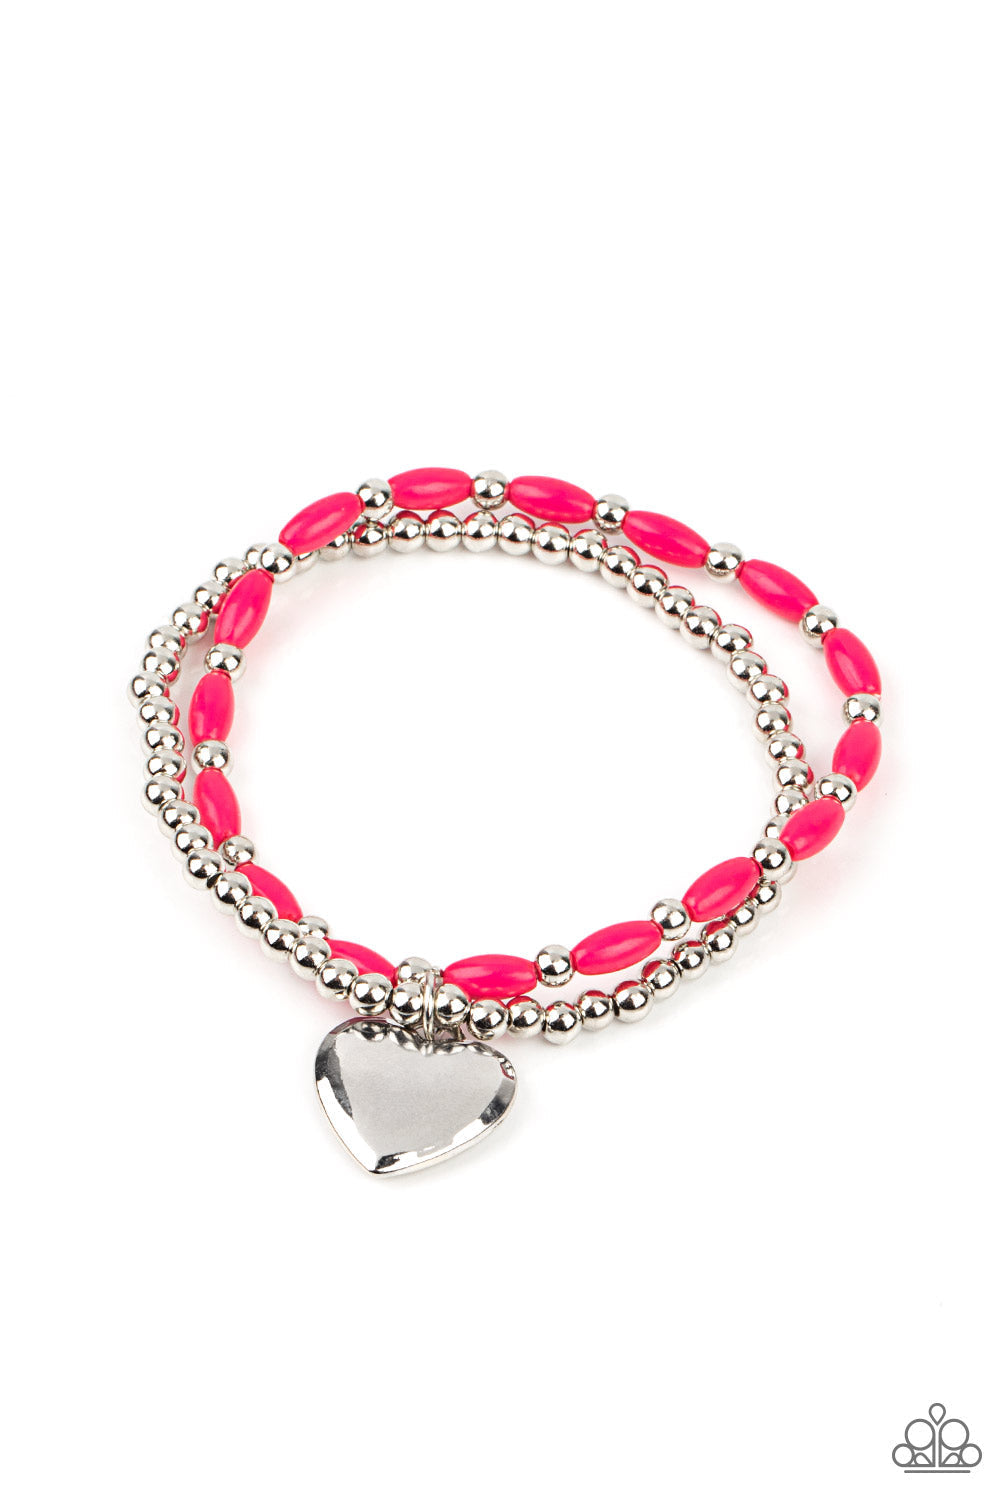 Candy Gram - Pink and Silver Heart Bracelet - Paparazzi Accessories - A bright silver heart dangles from a strand of playful Raspberry Sorbet beads. It is paired with a strand of round silver beads threaded along a stretchy band for a whimsical display around the wrist.